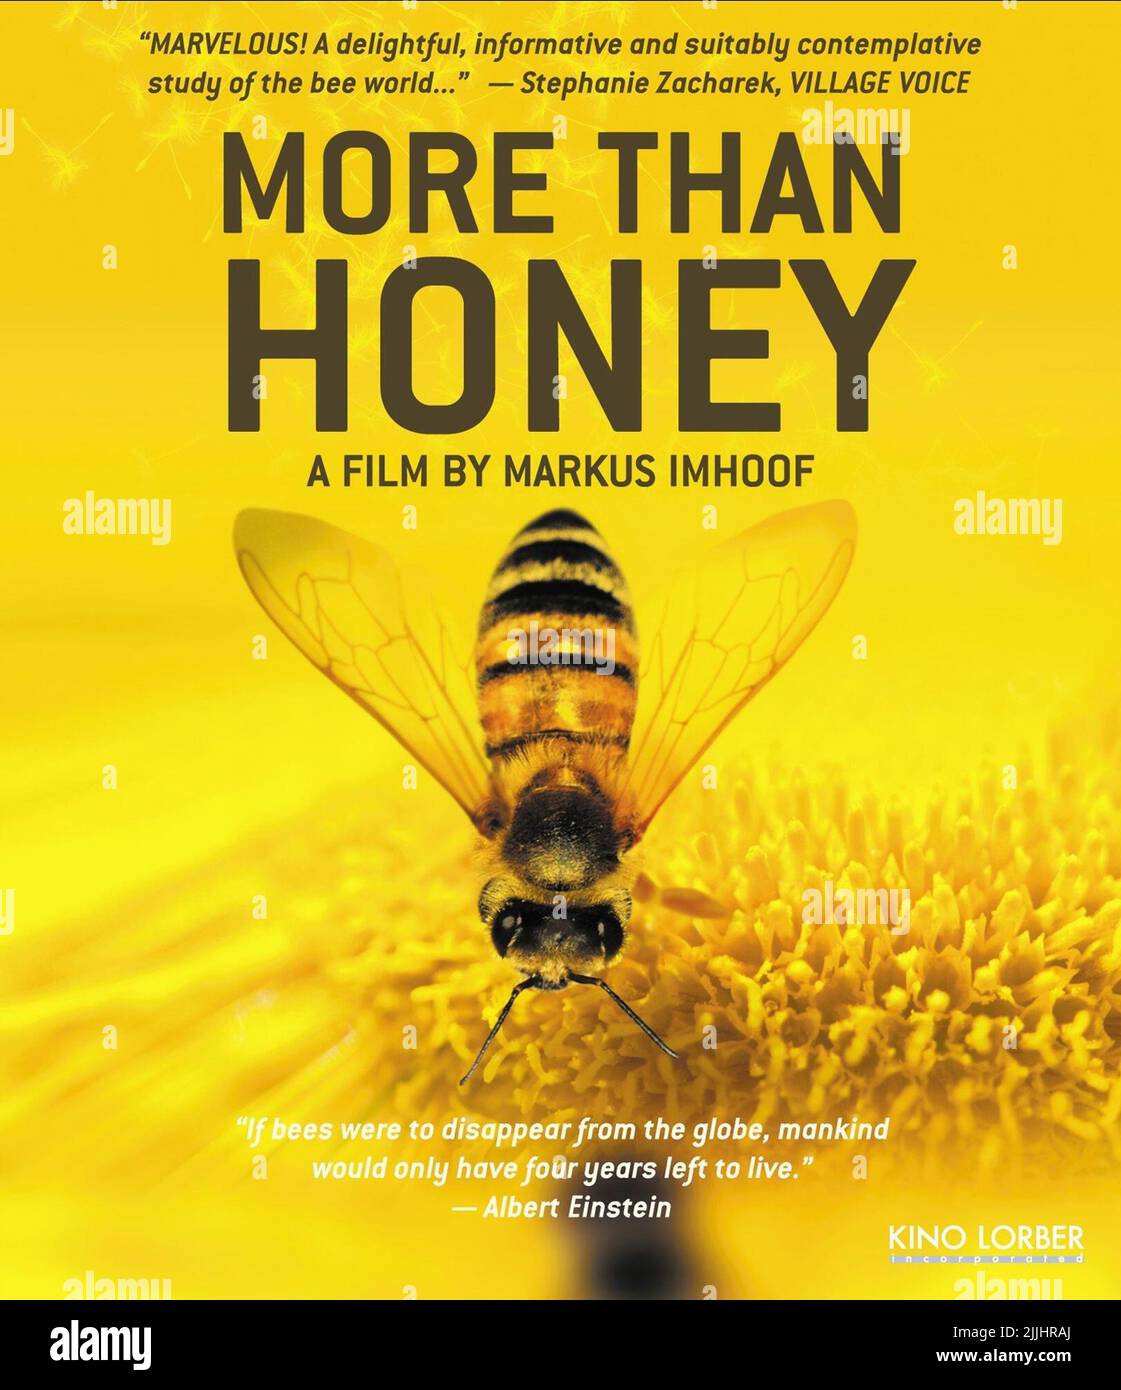 BEE MOVIE POSTER, MORE THAN HONEY, 2012 Stock Photo